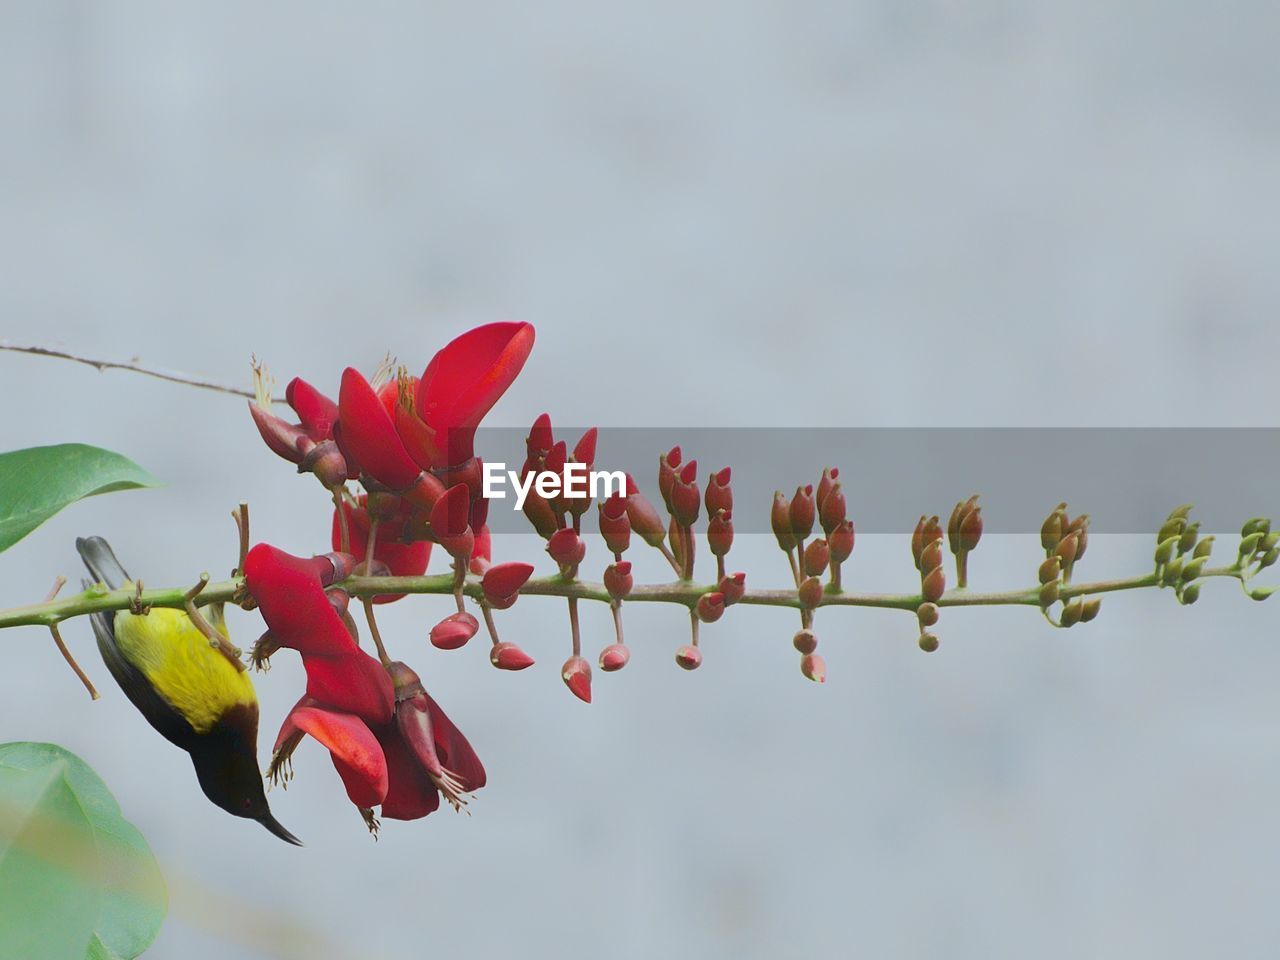 CLOSE-UP OF RED FLOWERING PLANTS AGAINST SKY